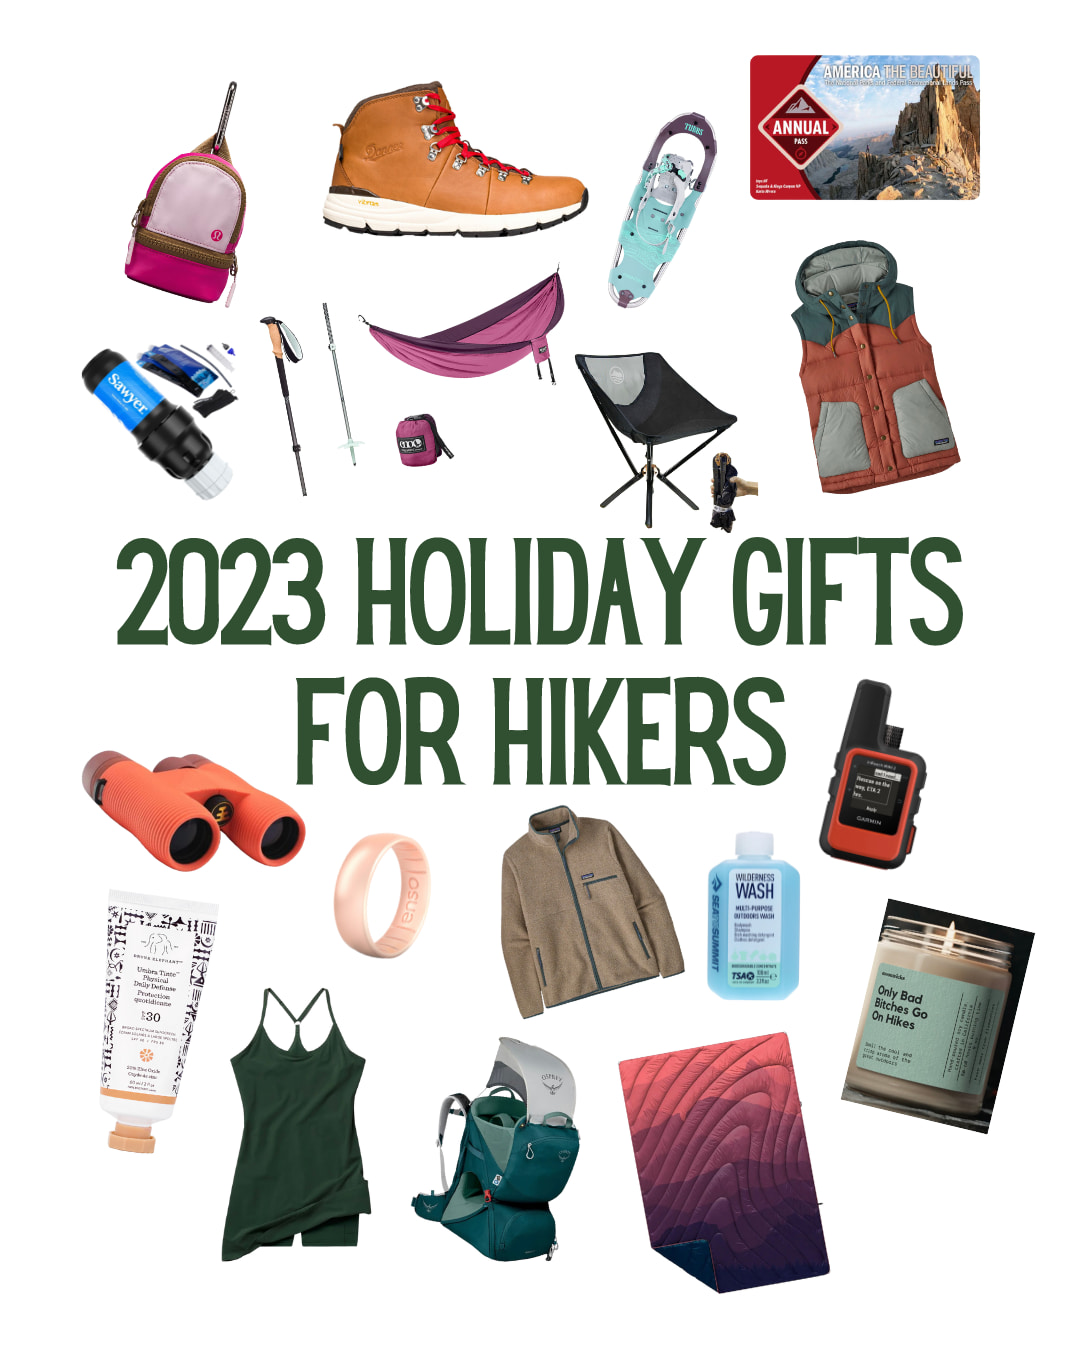 2023 Holiday Gift Guide For Hikers